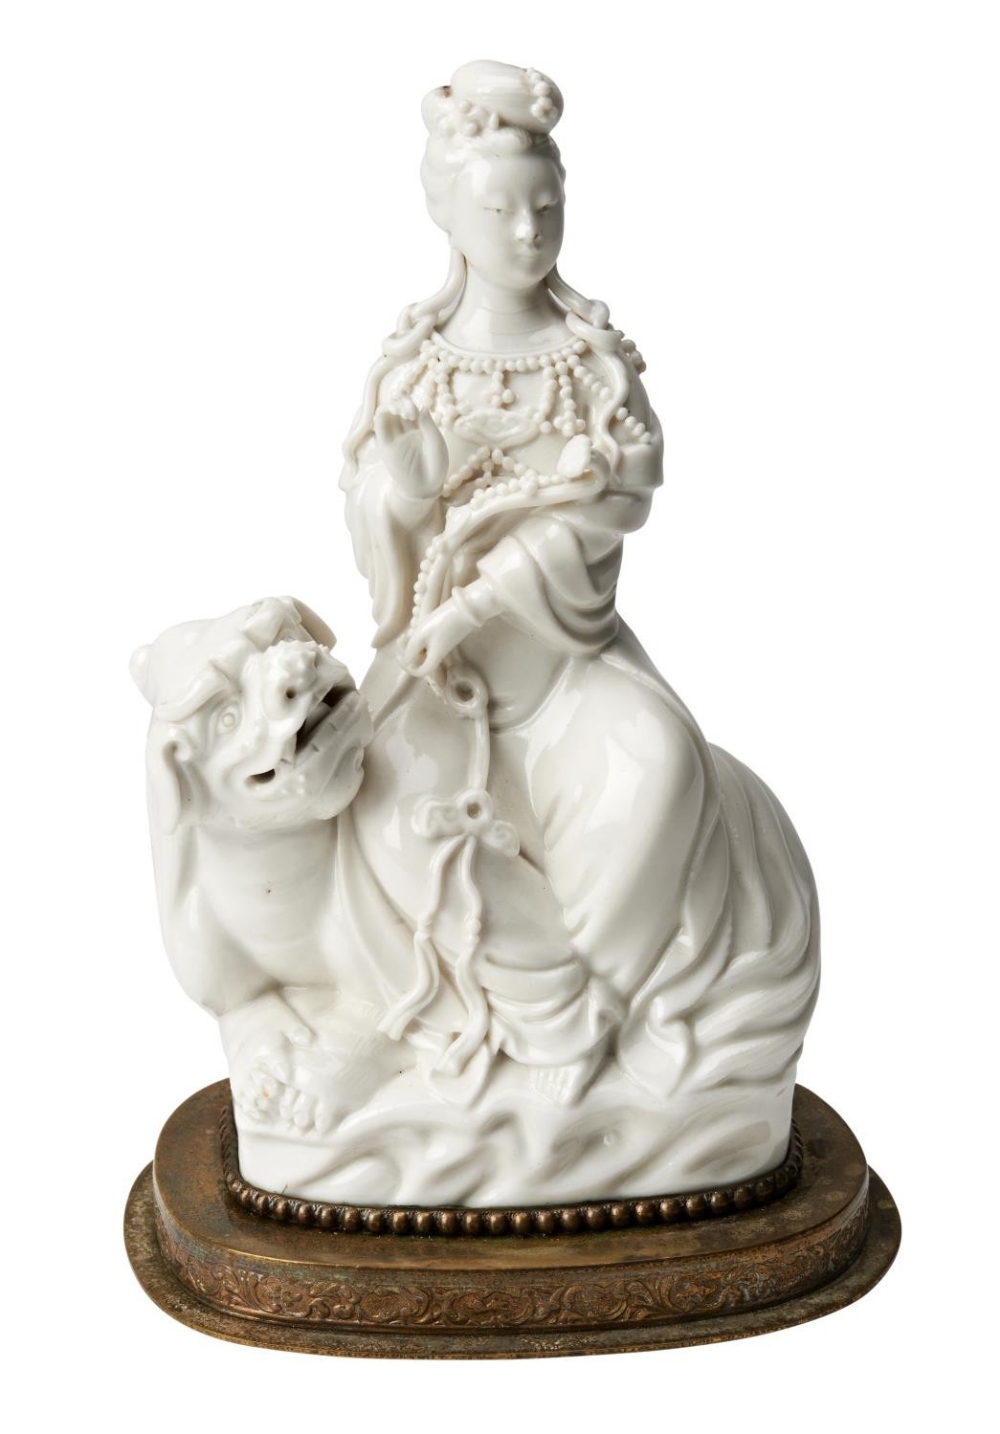 BLANC DE CHINE GROUP&nbsp; LATE QING / REPUBLIC PERIOD modelled as Guanyin seated on a Buddhist lion